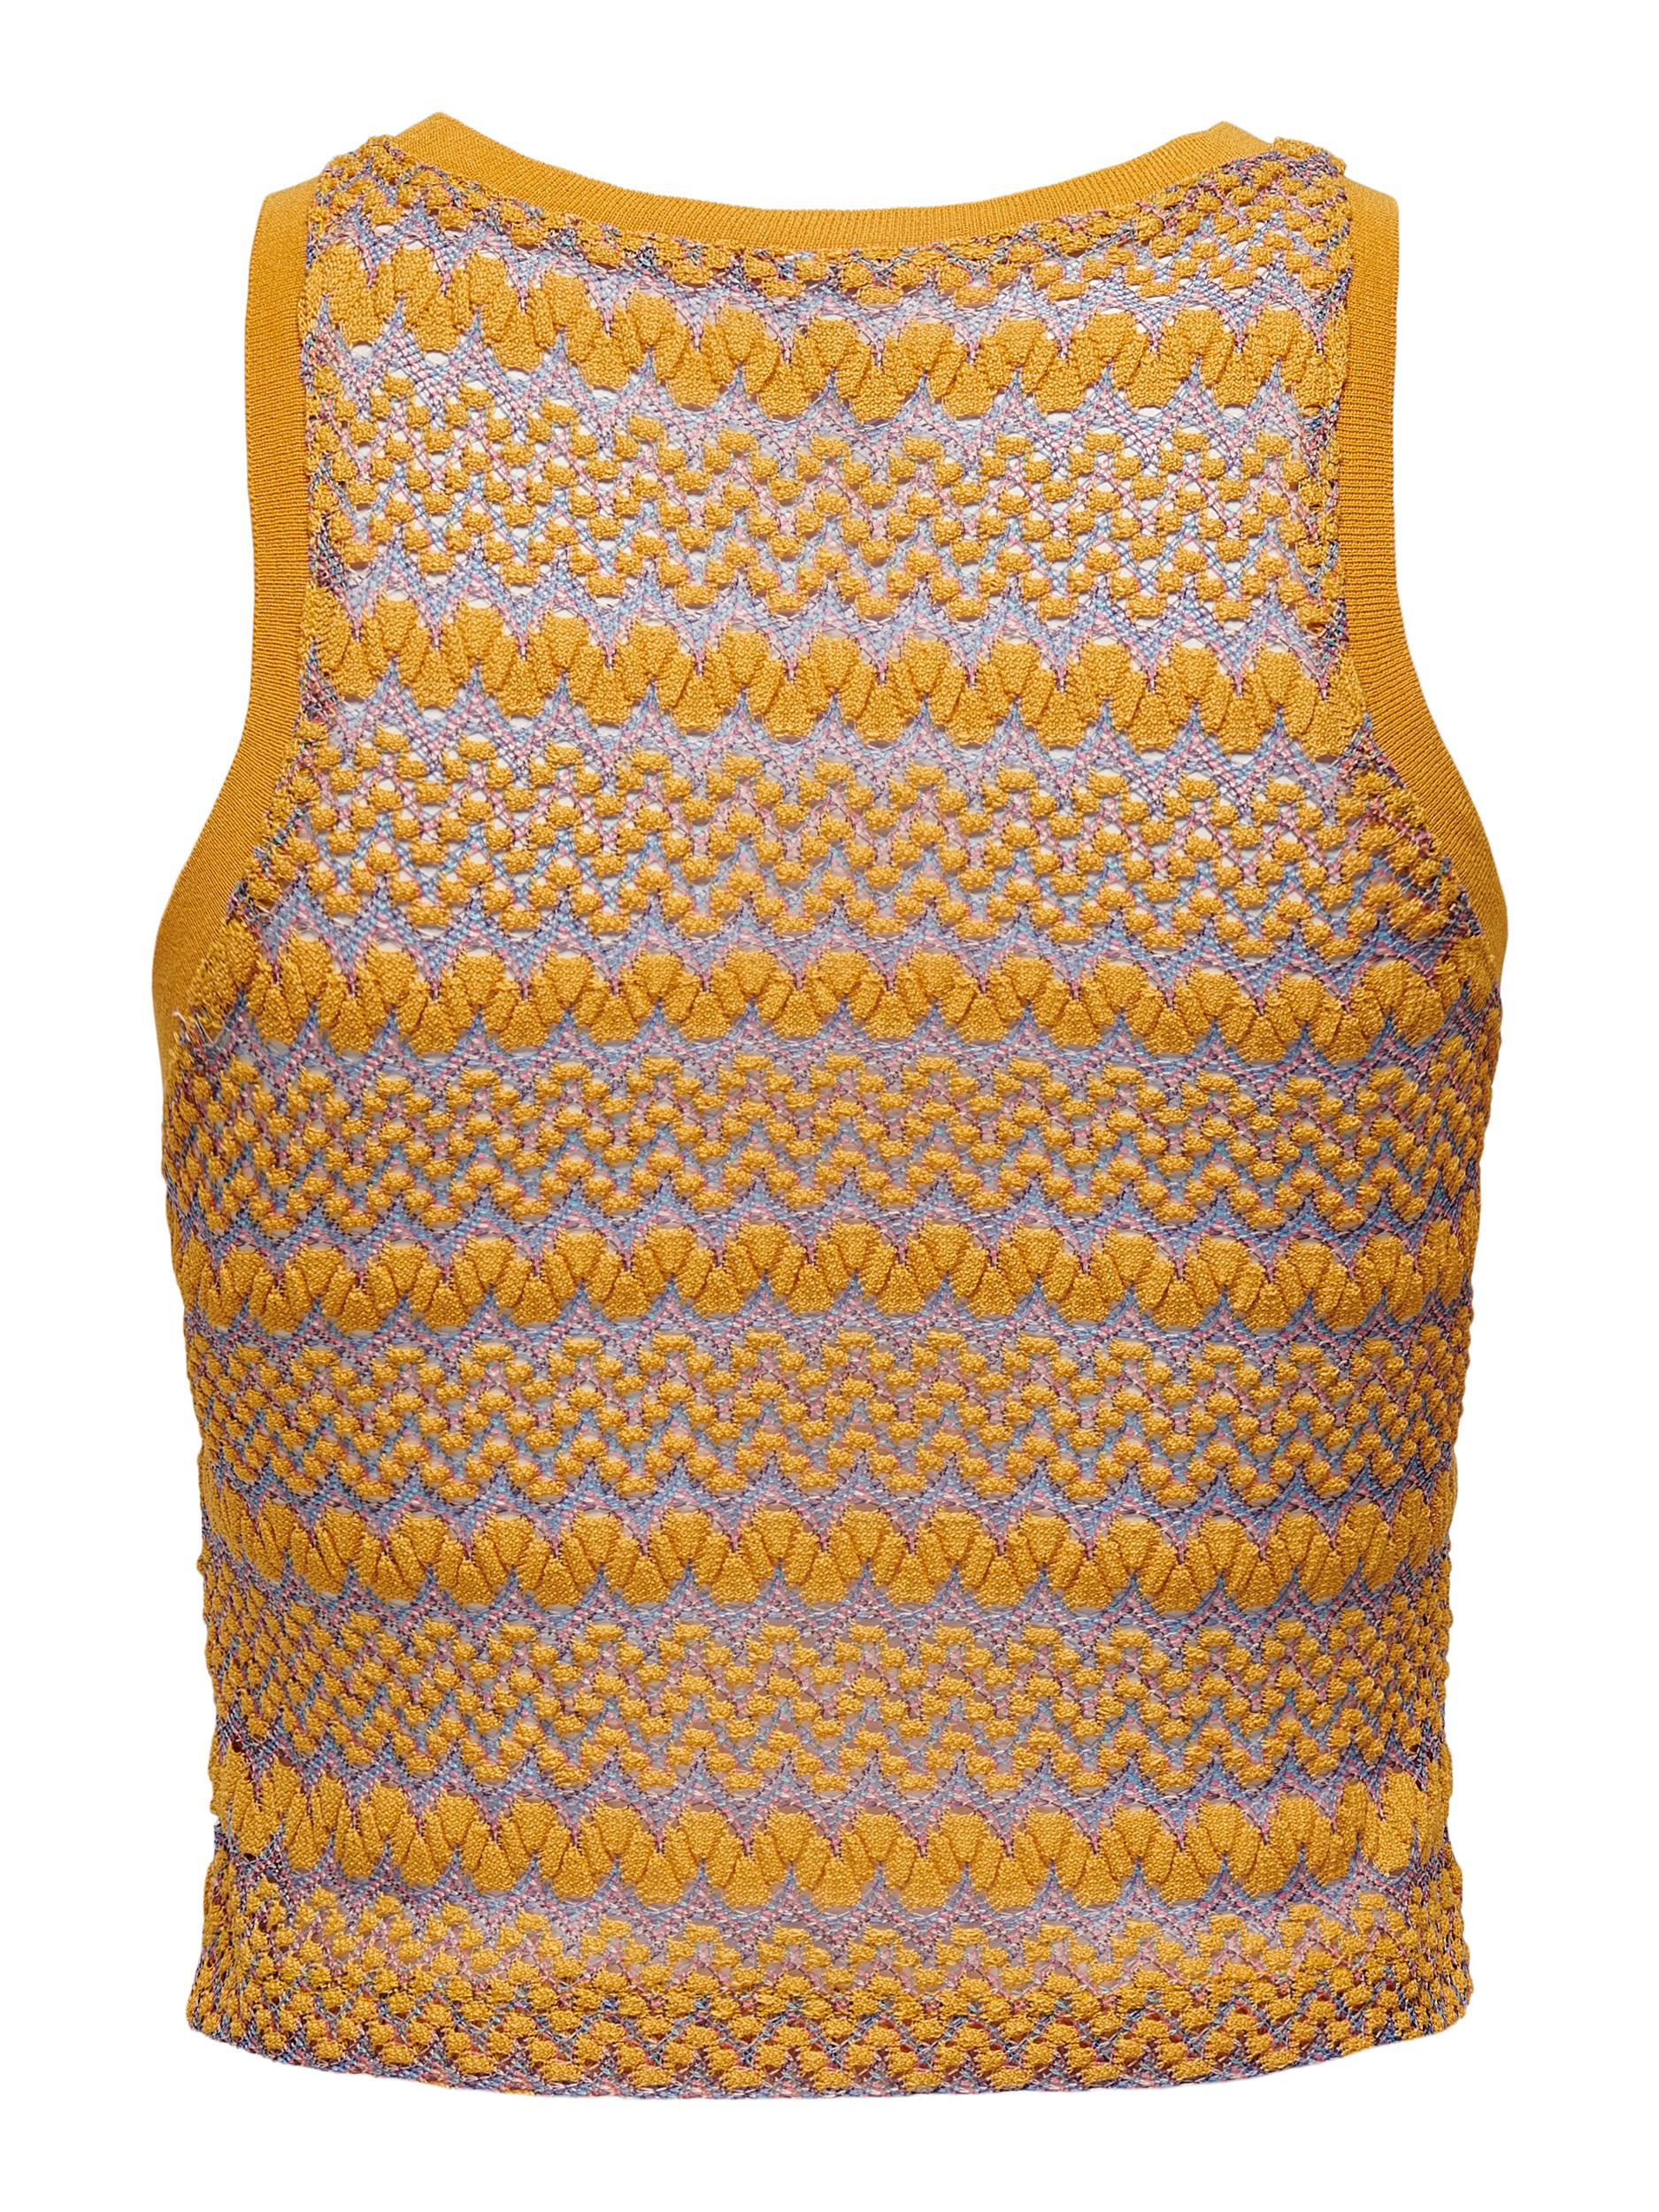 Only - Cropped fit top, Ocra Yellow, large image number 1